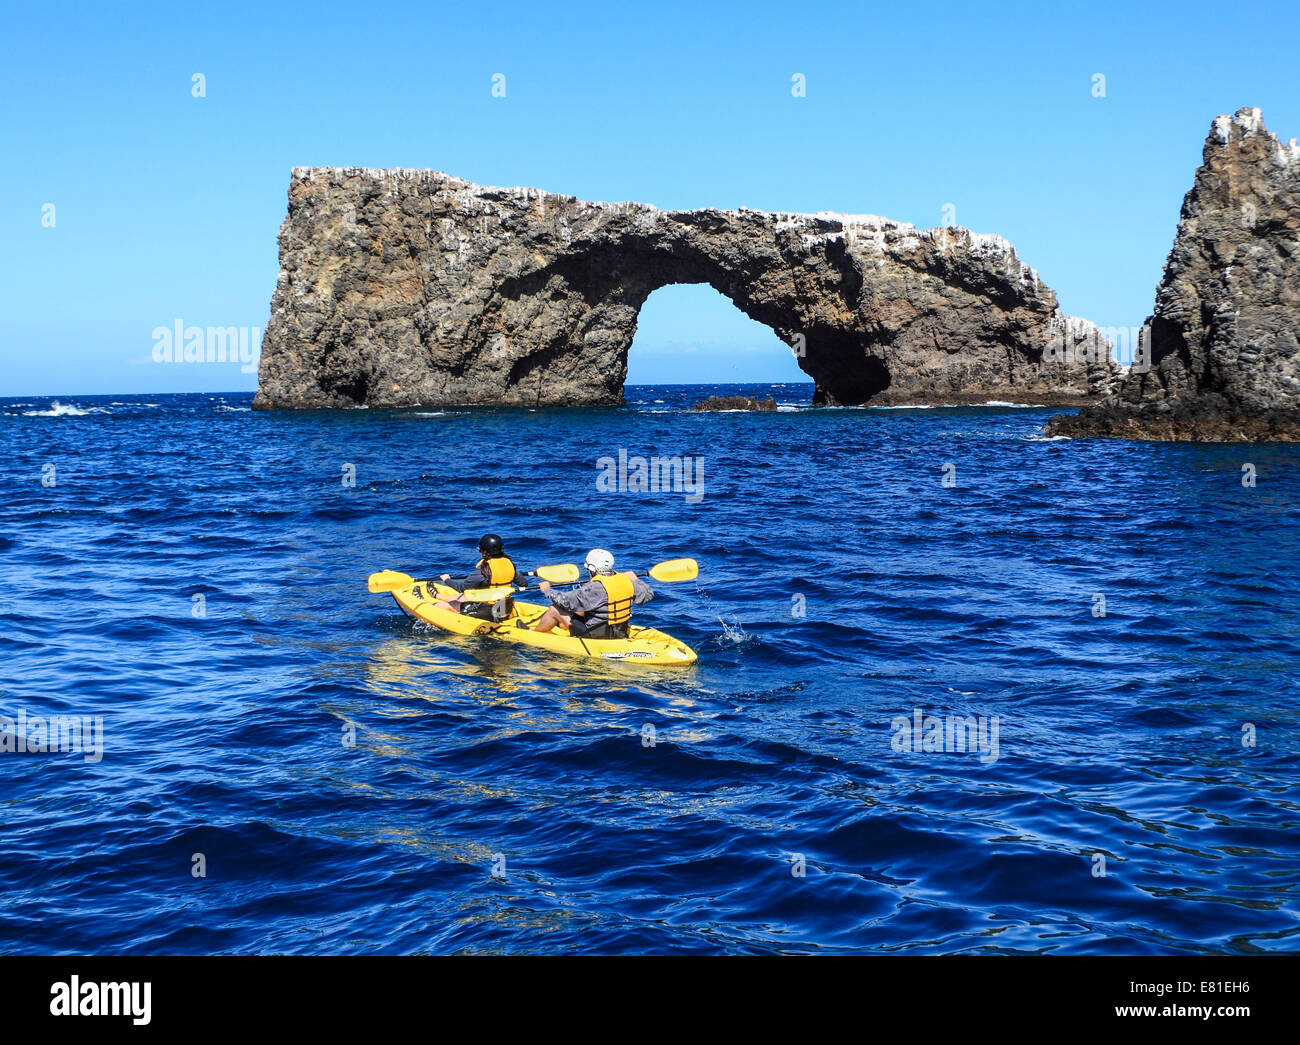 Channel islands national park people hires stock photography and